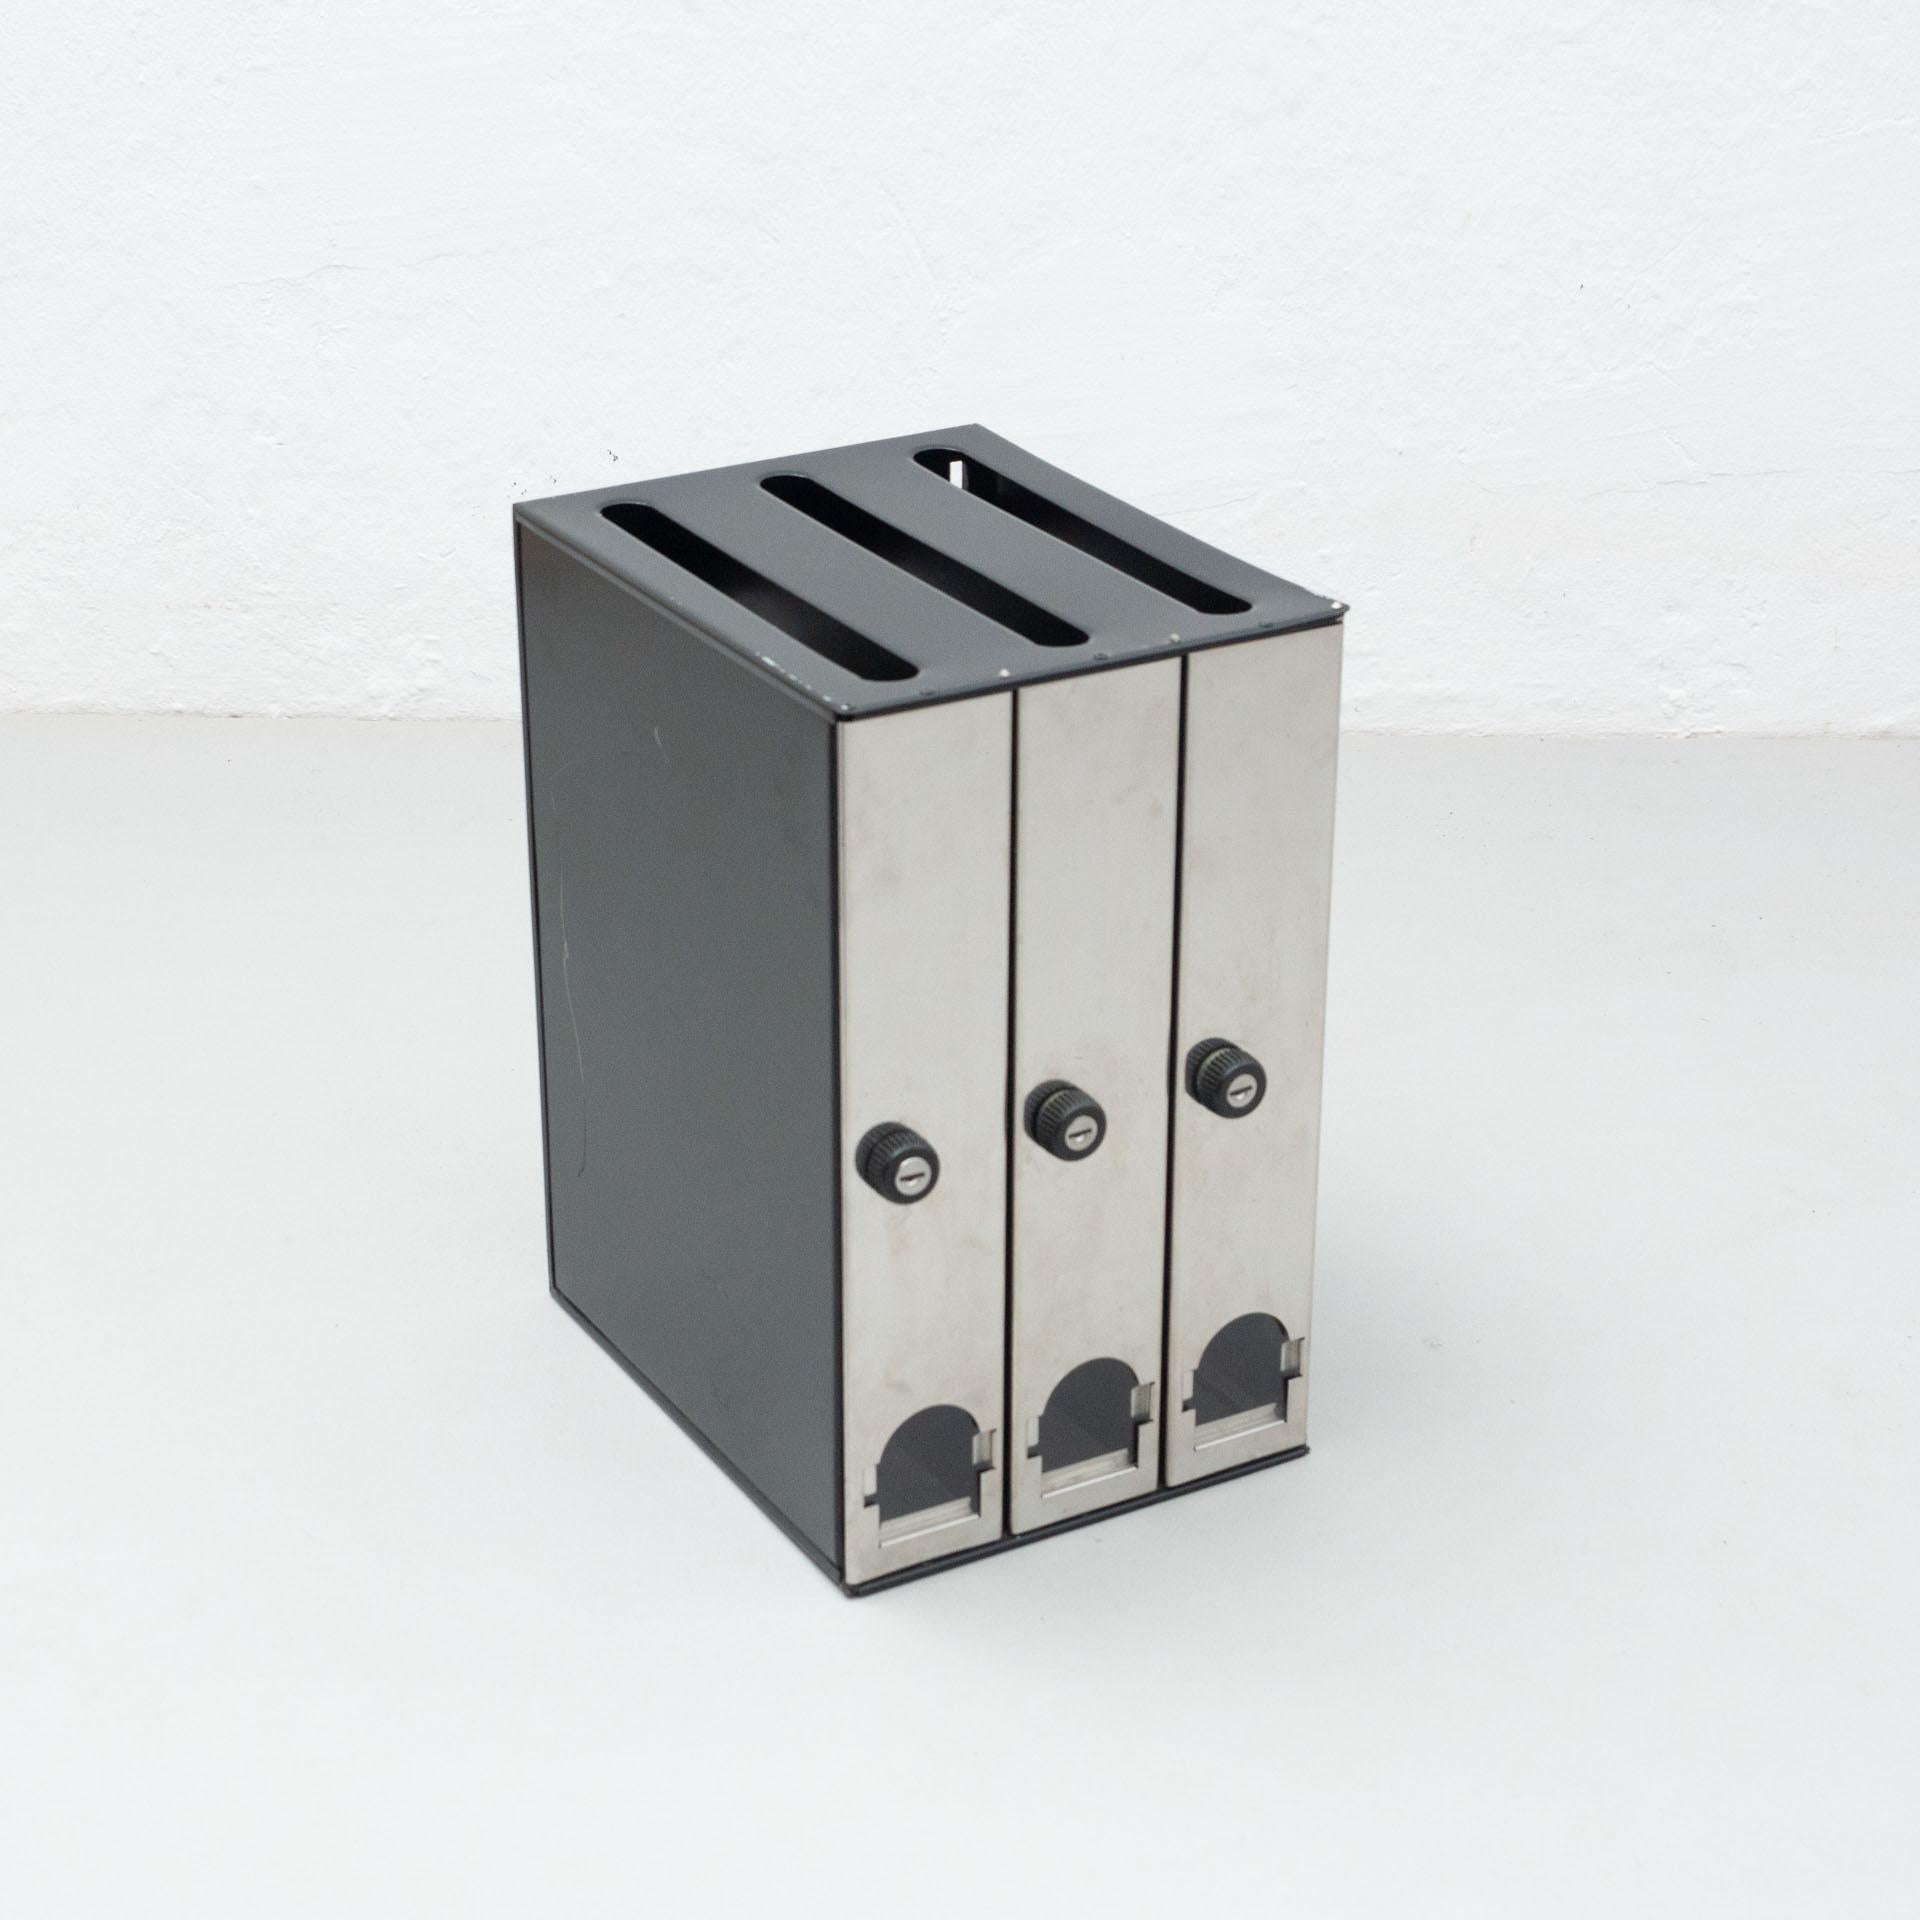 Mailbox designed by oscar Tusquets and Lluis Clotet.
Manufacturer by BD Barcelona. Spain, circa 1984.

In original condition, with minor wear consistent with age and use, preserving a beautiful